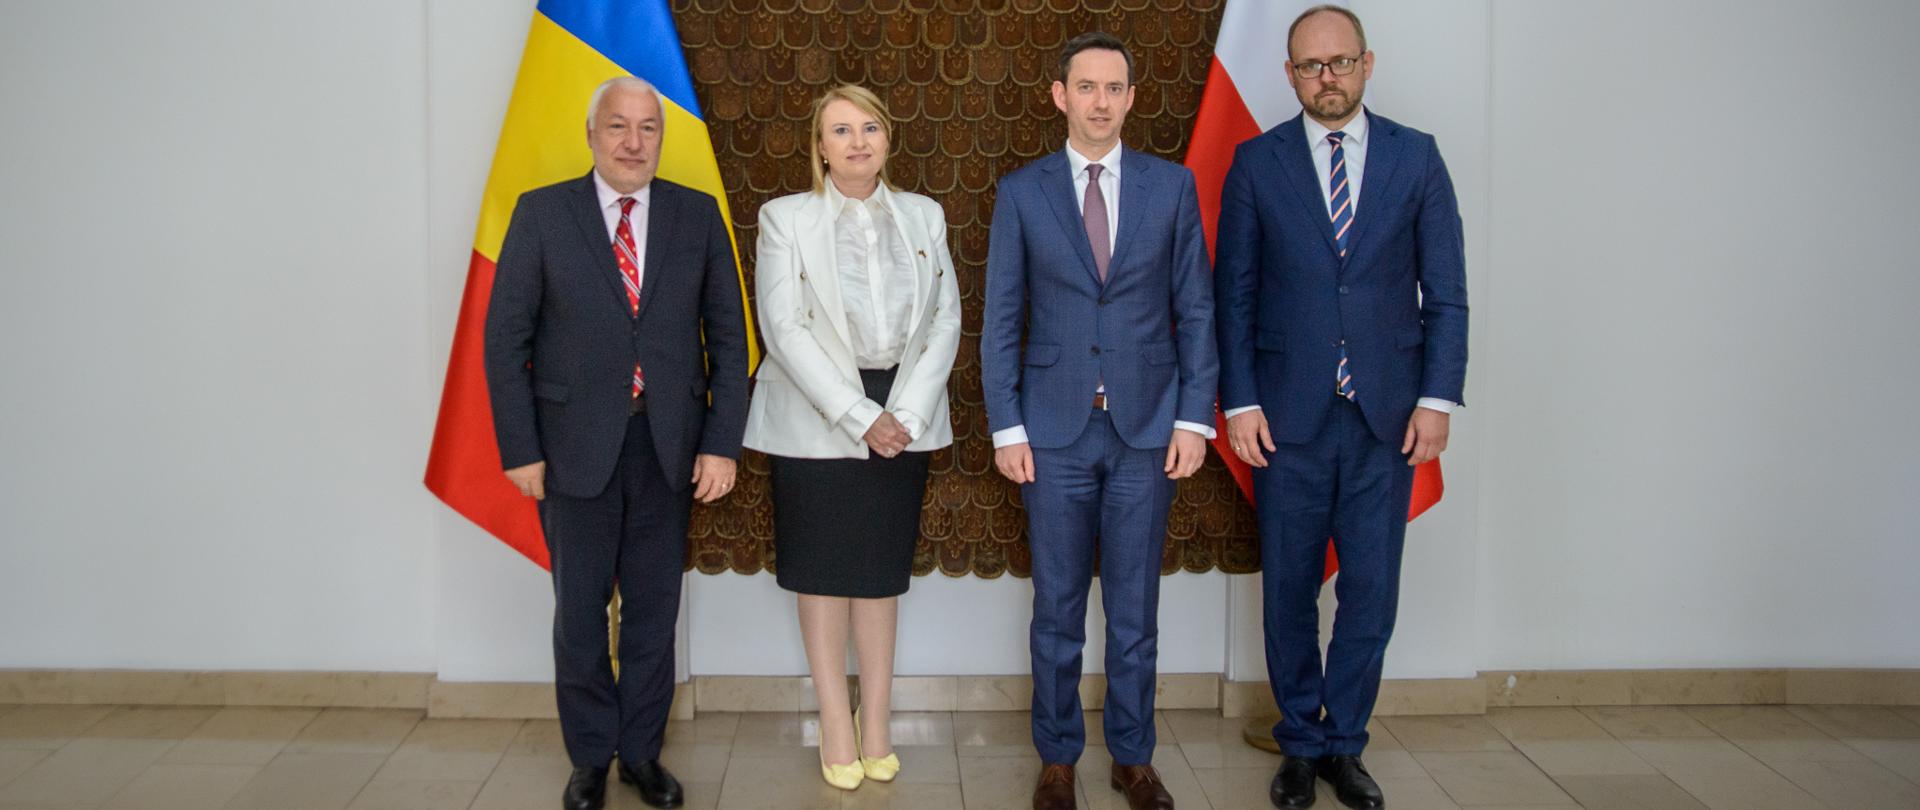 Polish-Romanian Strategic Dialogue consultations on security and defence